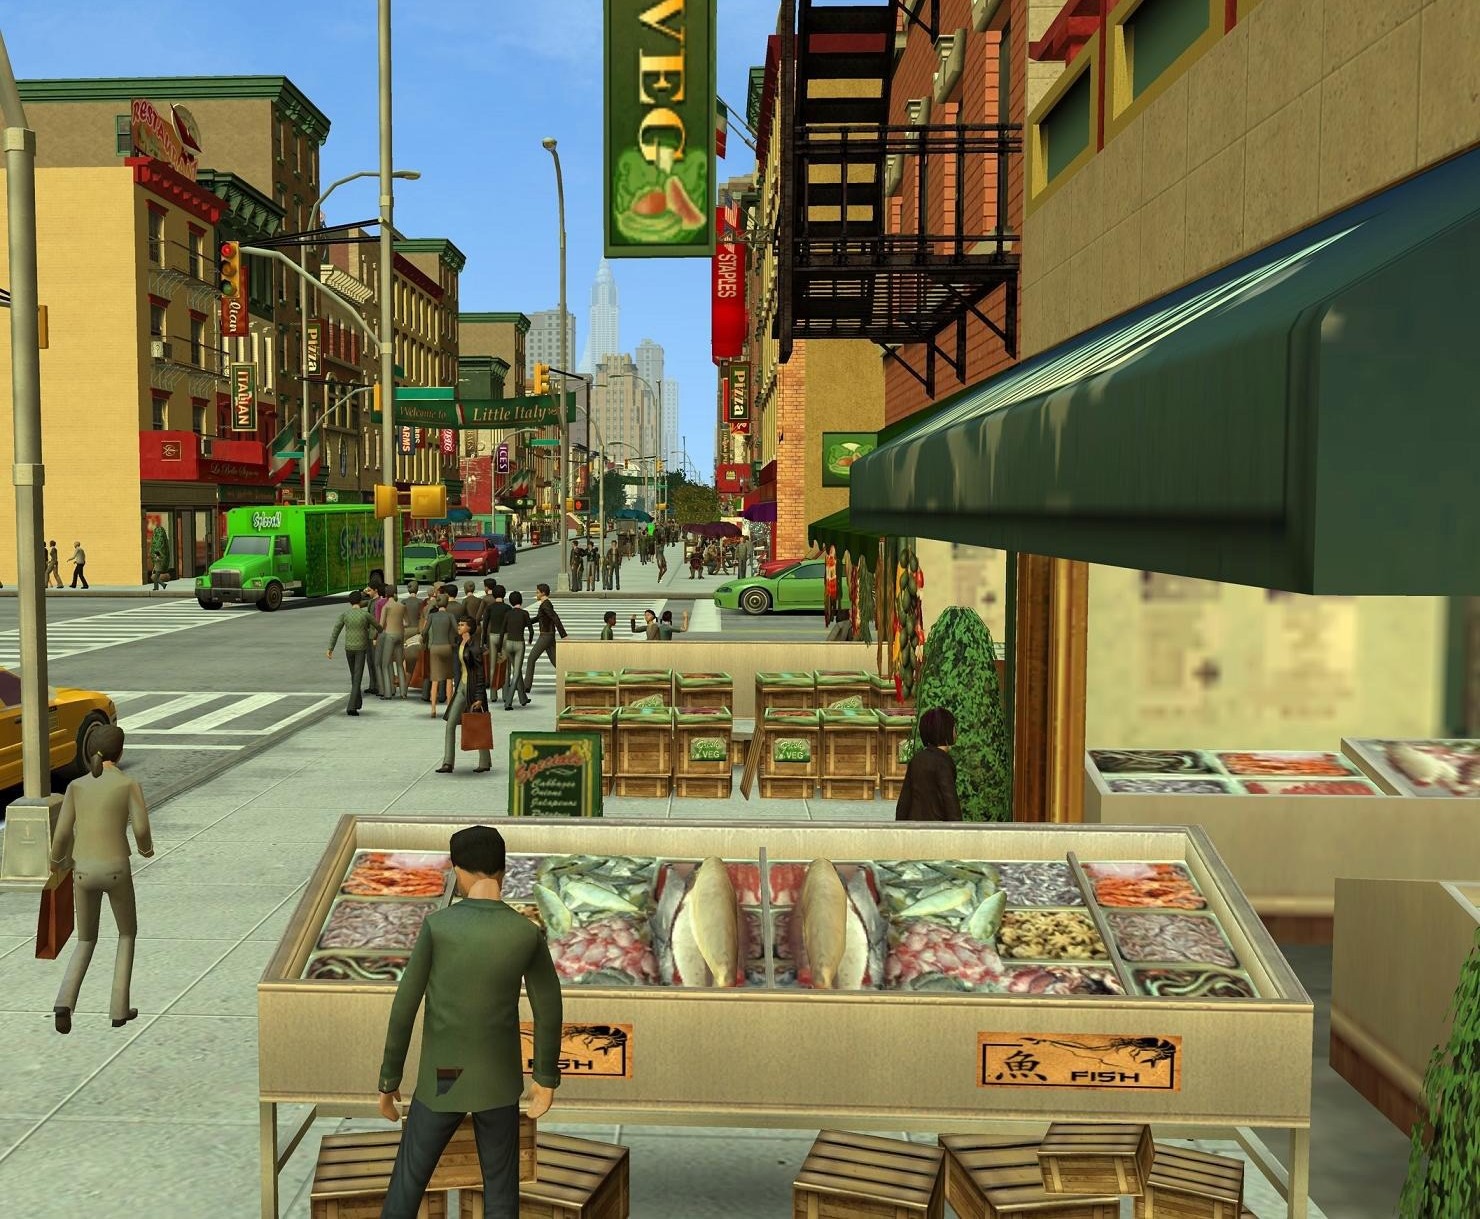 virtual city game free download for pc